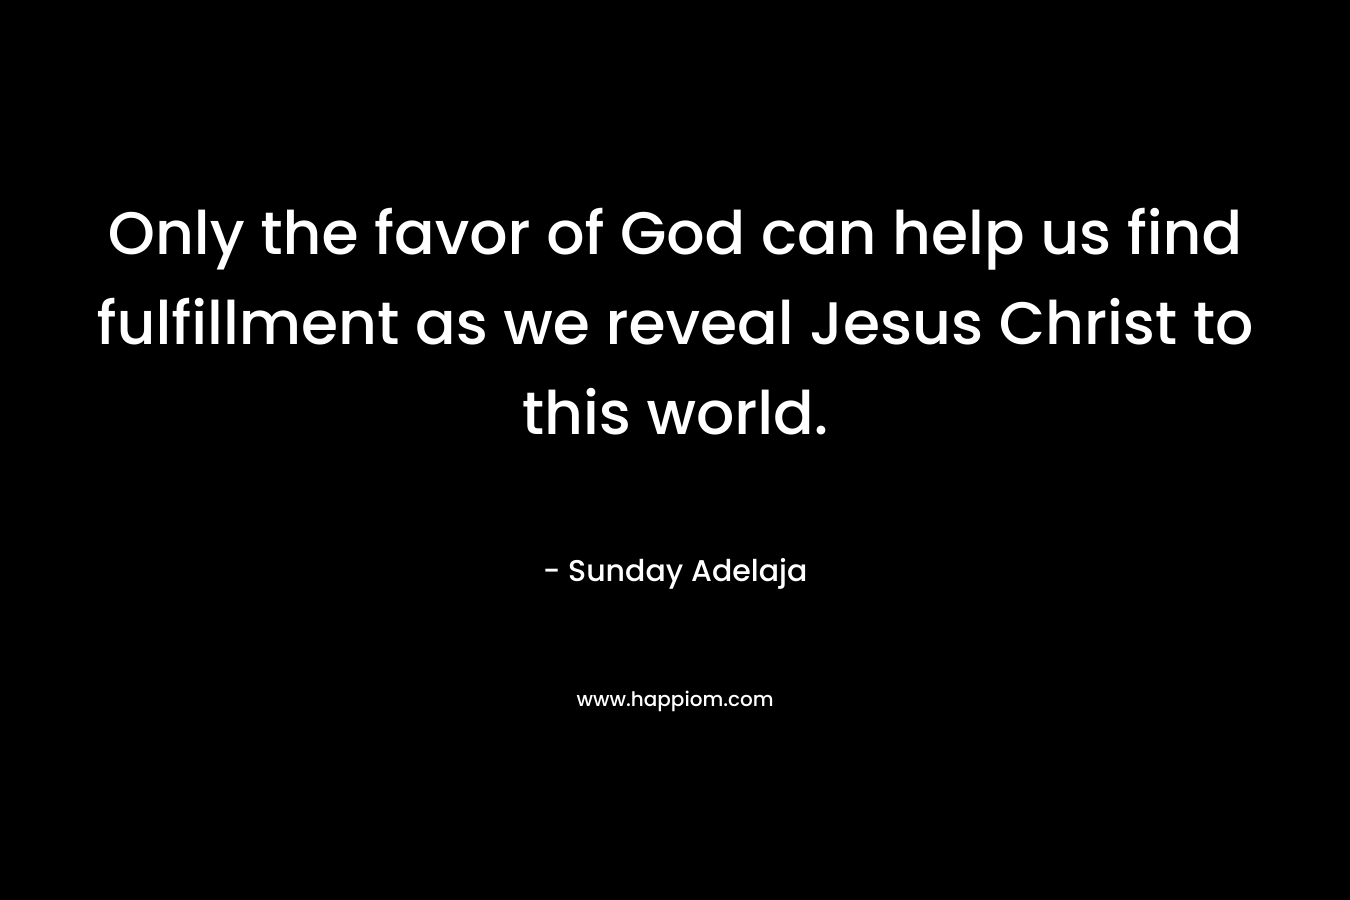 Only the favor of God can help us find fulfillment as we reveal Jesus Christ to this world.